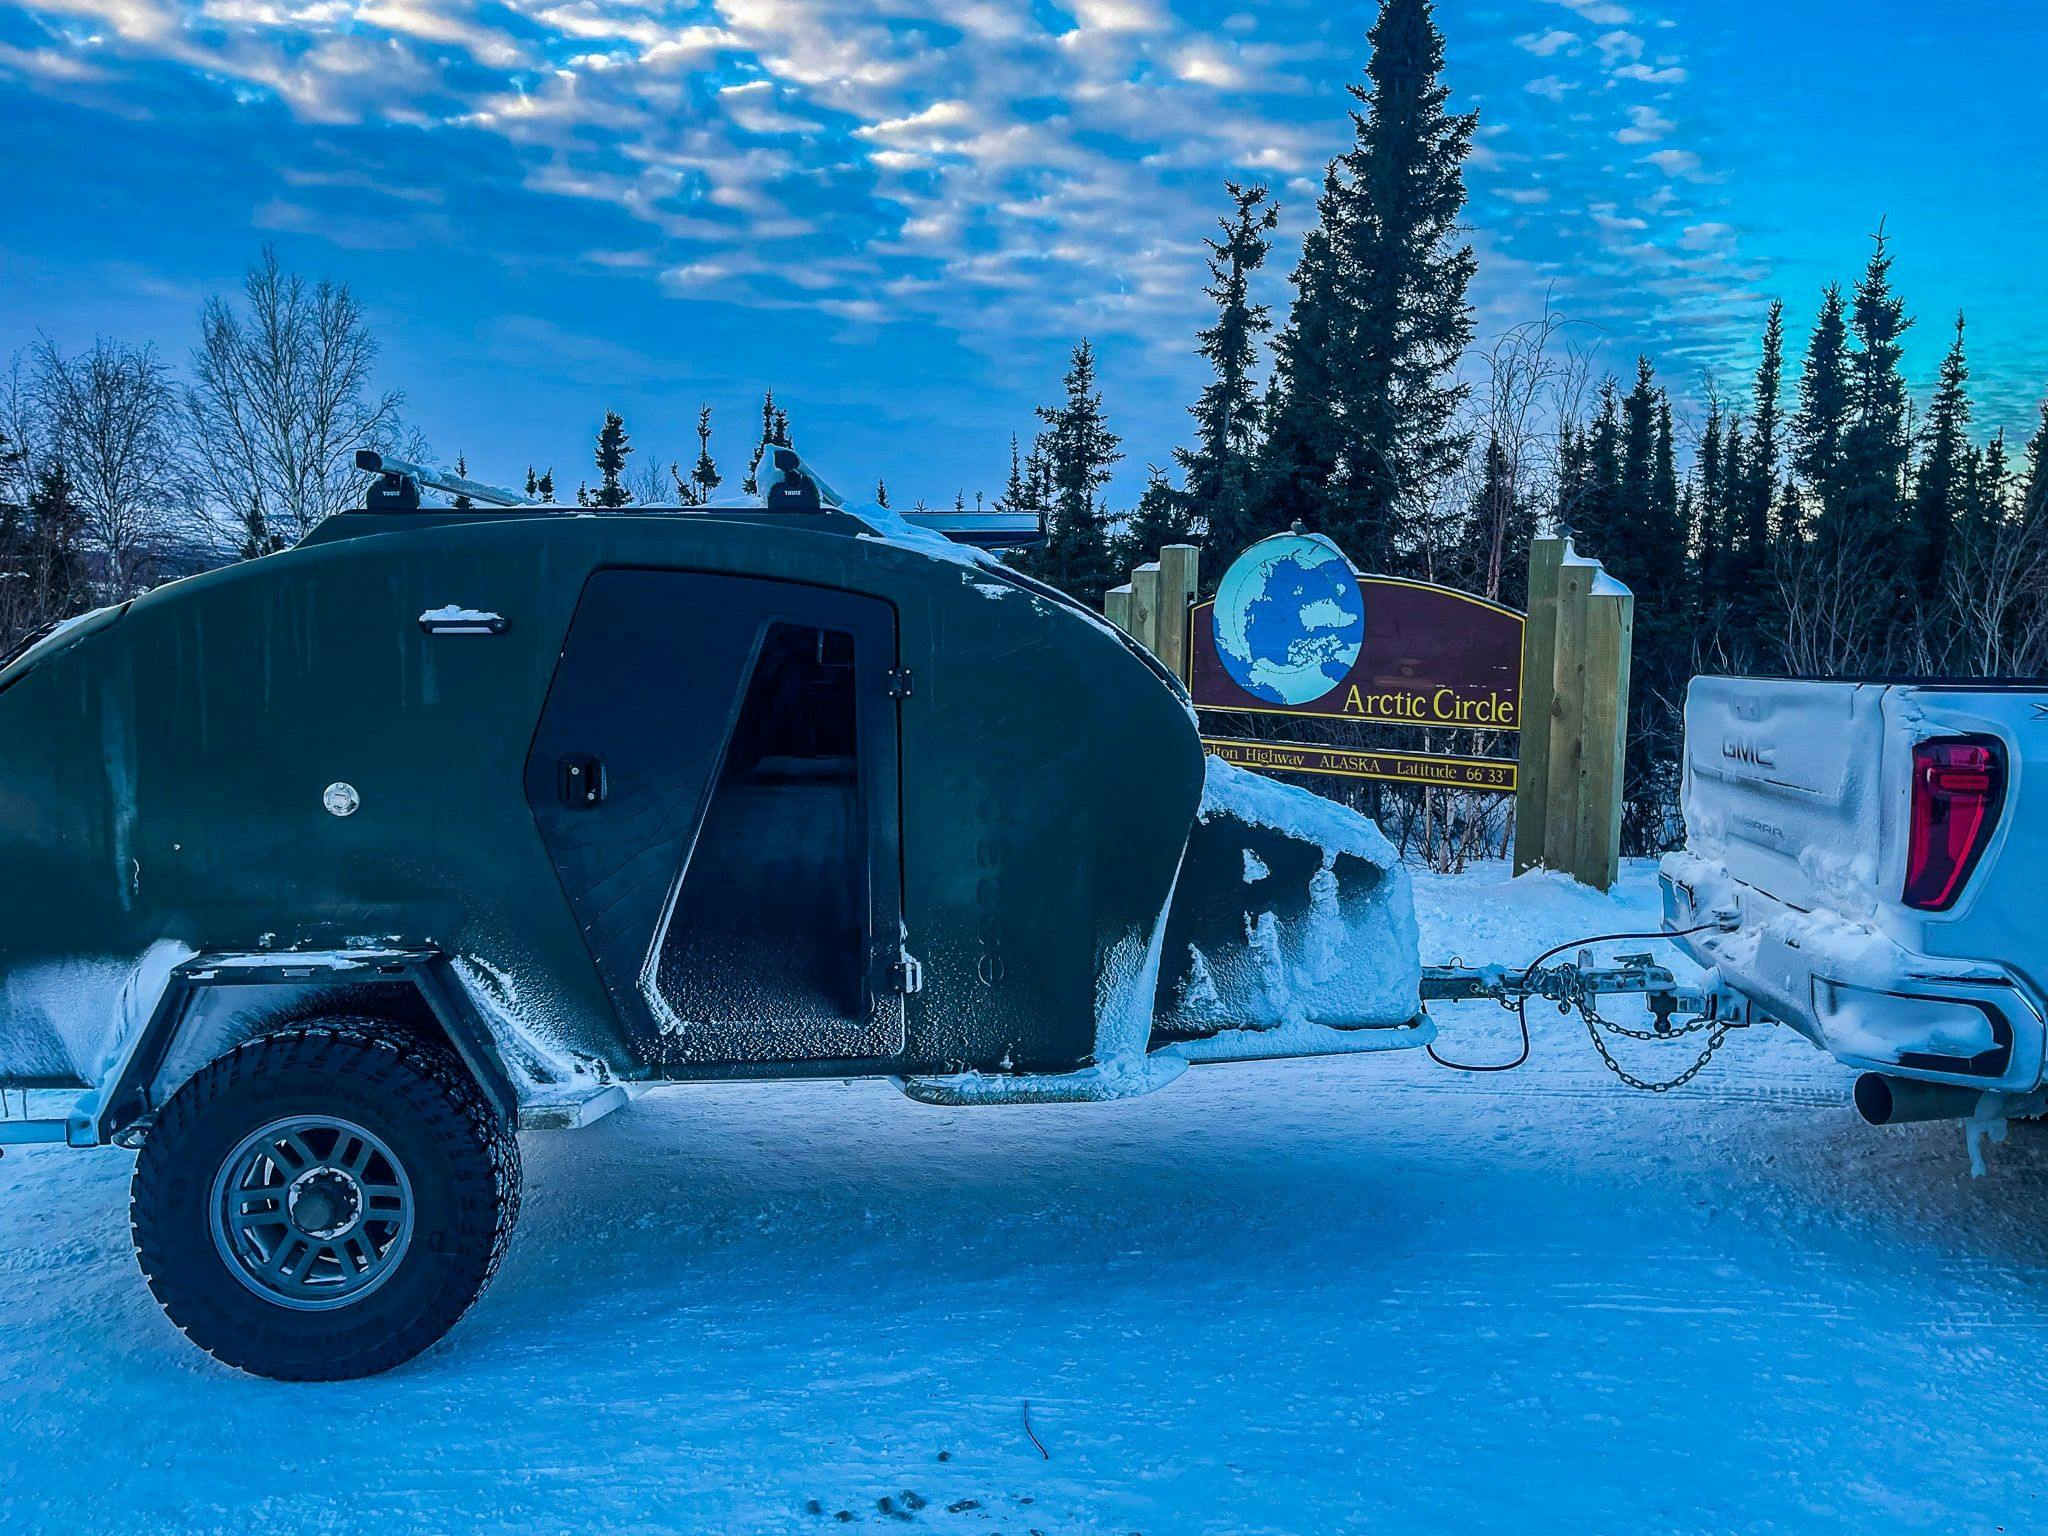 A TOPO2, an offroad camper, up camping at the Artic Circle.